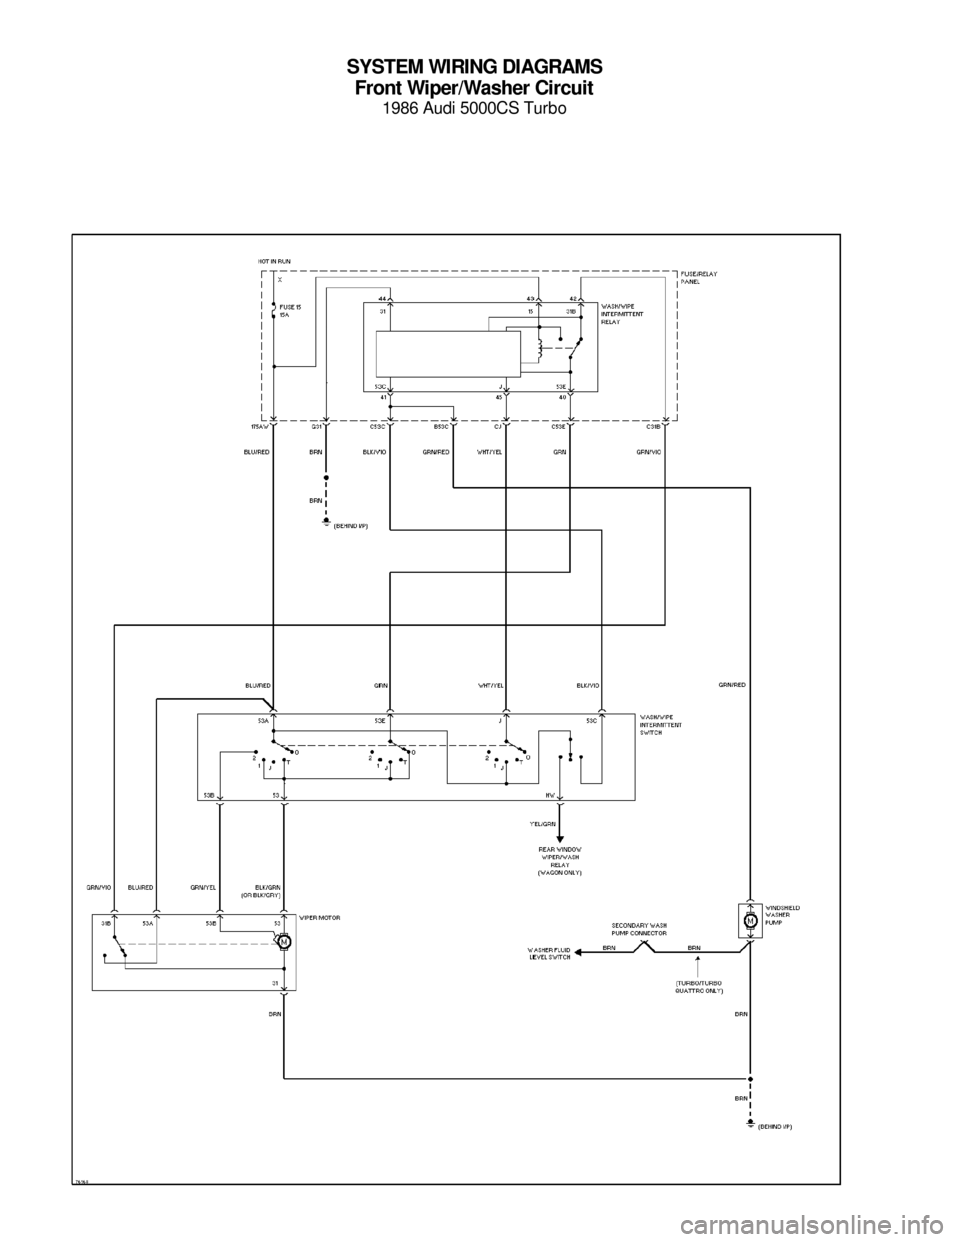 AUDI 5000CS 1986 C2 System Wiring Diagram SYSTEM WIRING DIAGRAMS
Front Wiper/Washer Circuit
1986 Audi 5000CS Turbo
For x    
Copyright © 1998 Mitchell Repair Information Company, LLCMonday, July 19, 2004  05:53PM 